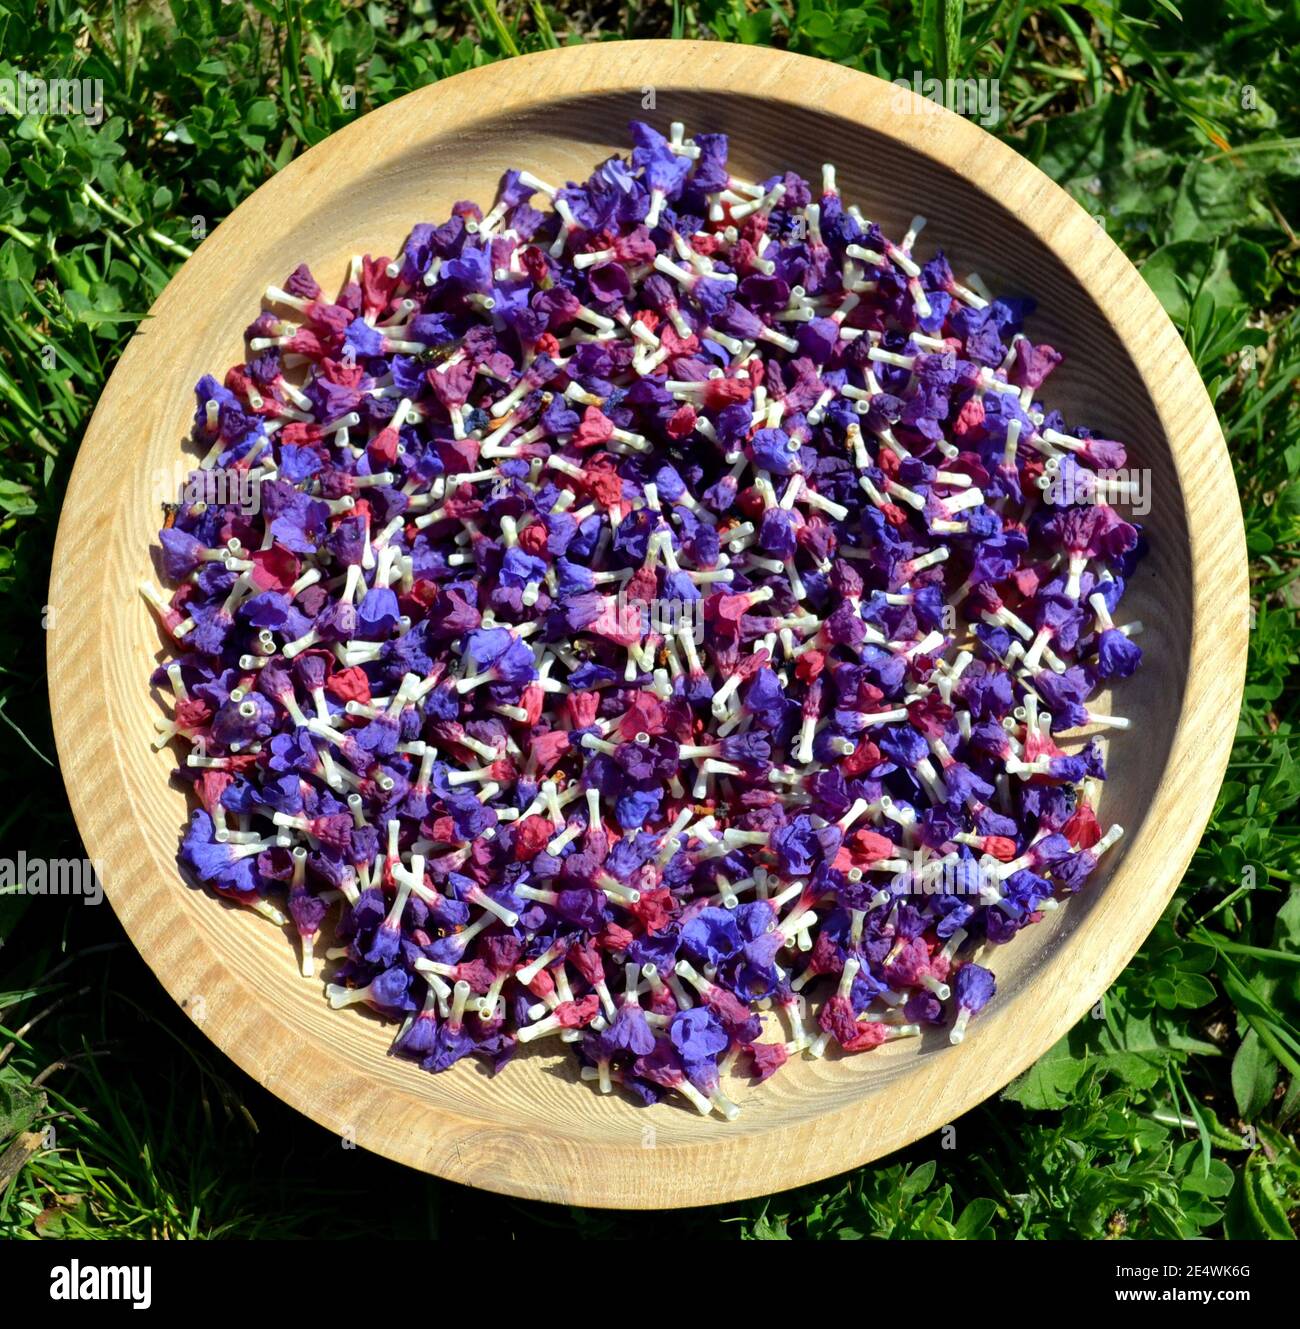 Lot of Pulmonaria officinalis flowers in a wooden bowl on grass Stock Photo